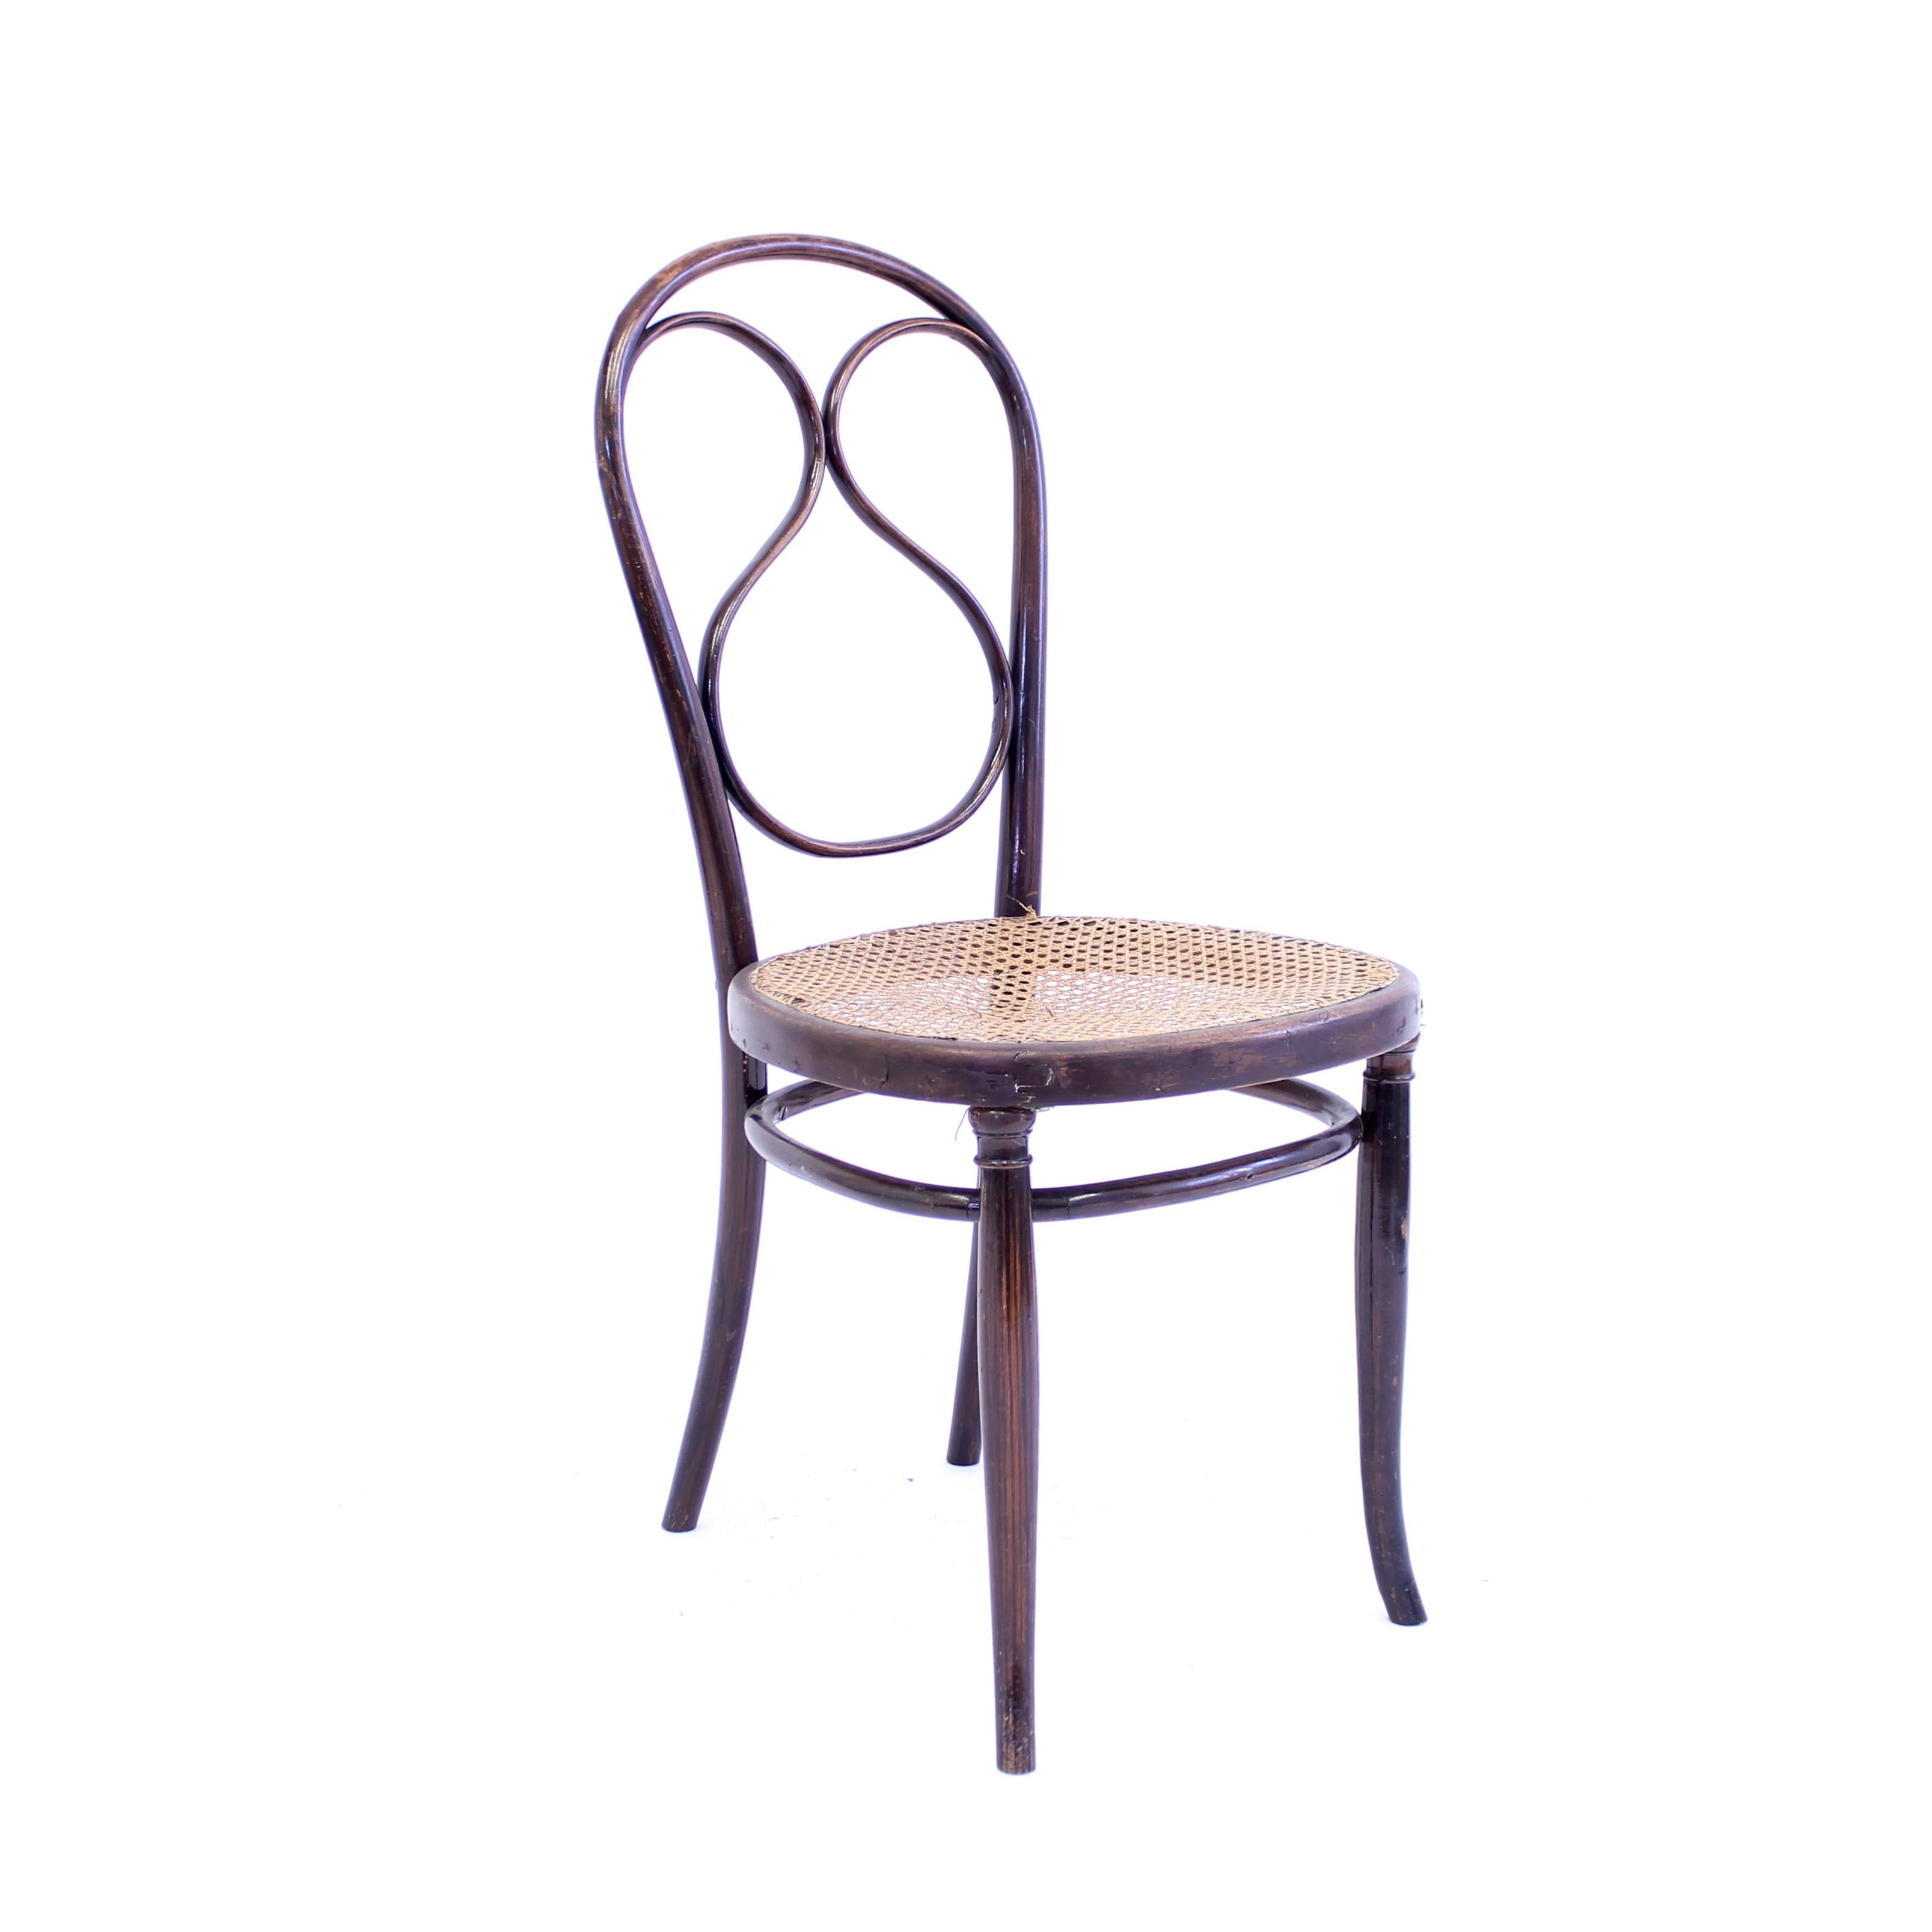 Vienna Secession Fischel bentwood café chair, early 20thy century For Sale